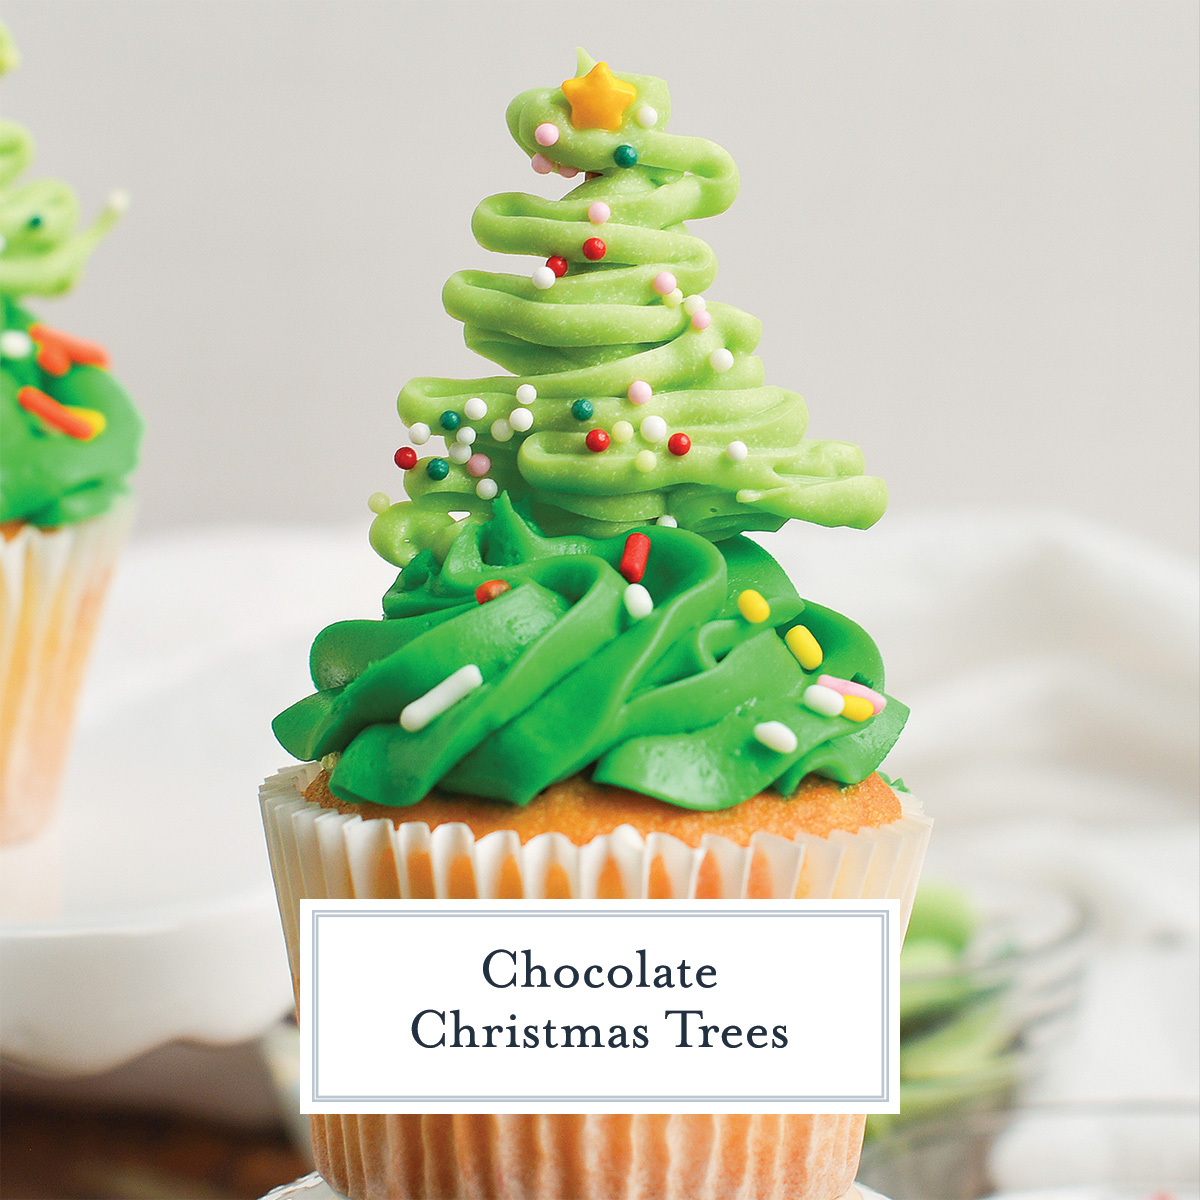 chocolate christmas tree on a cupcakes with text overlay